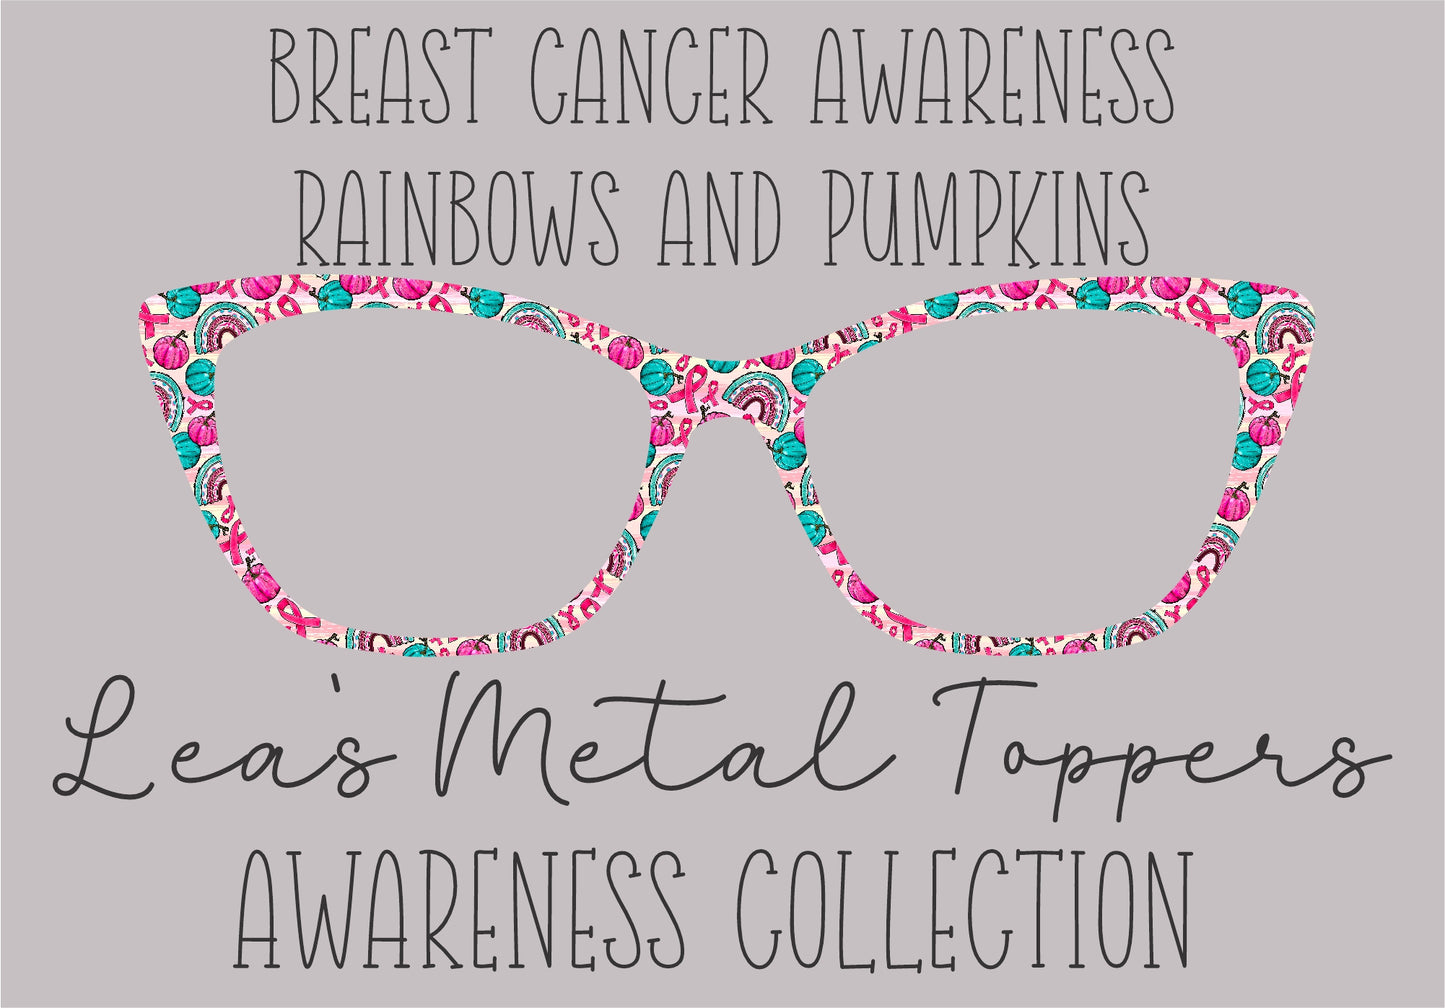 BREAST CANCER AWARENESS RAINBOWS AND PUMPKINS Eyewear Frame Toppers COMES WITH MAGNETS